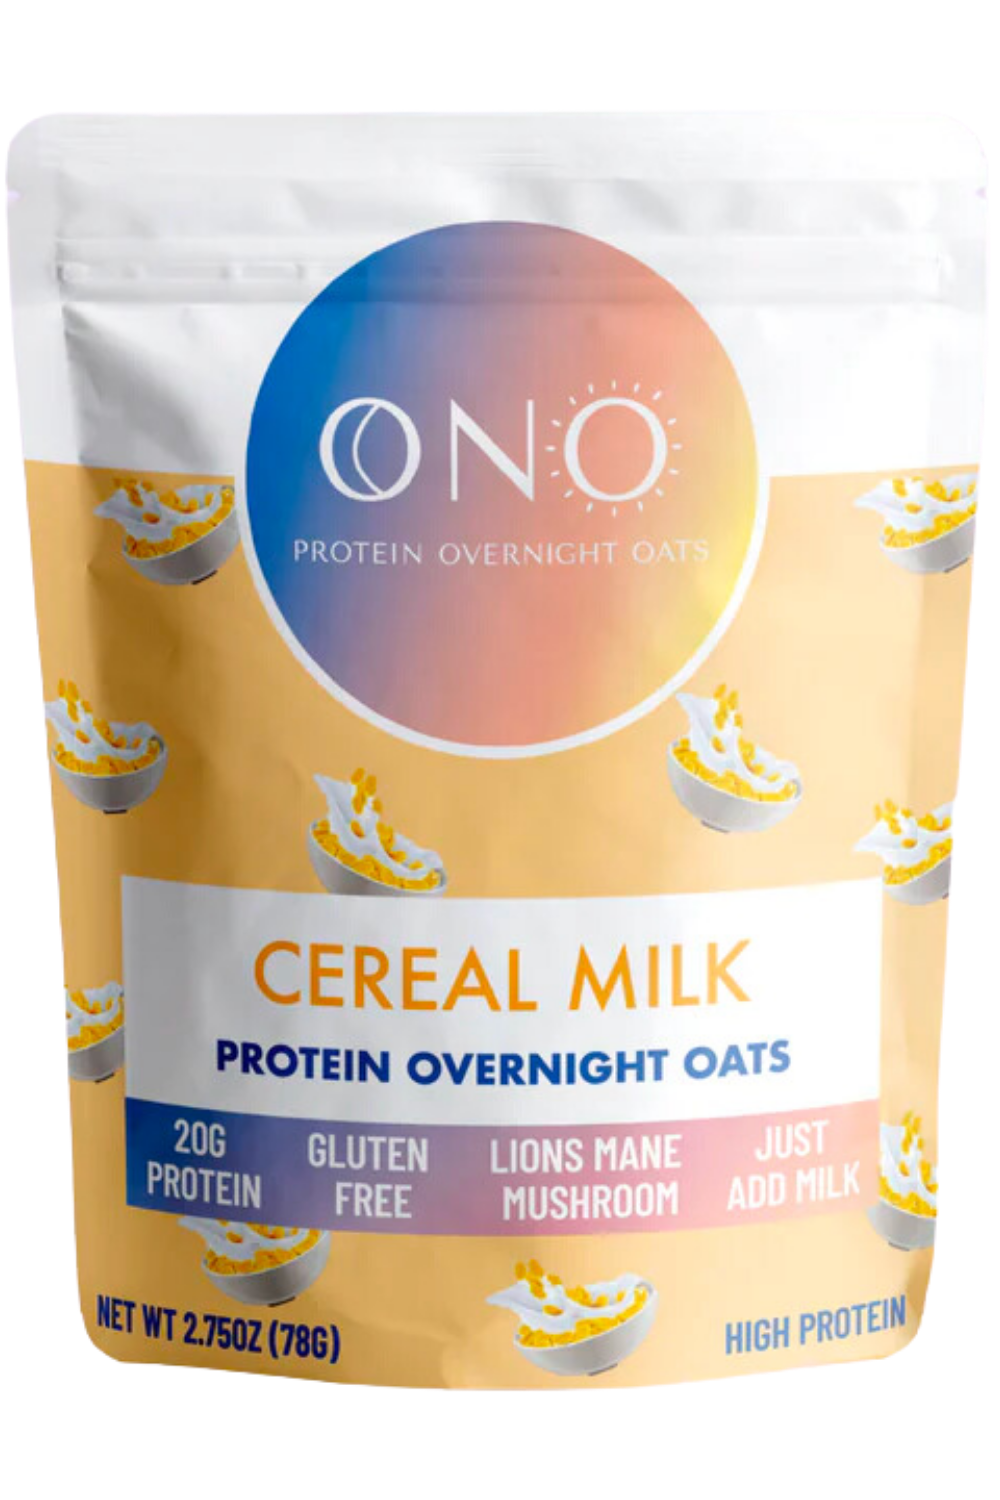 ONO Protein Overnight Oats- Cereal Milk, Cereal Milk, Single Serving, 2.72 oz packet.